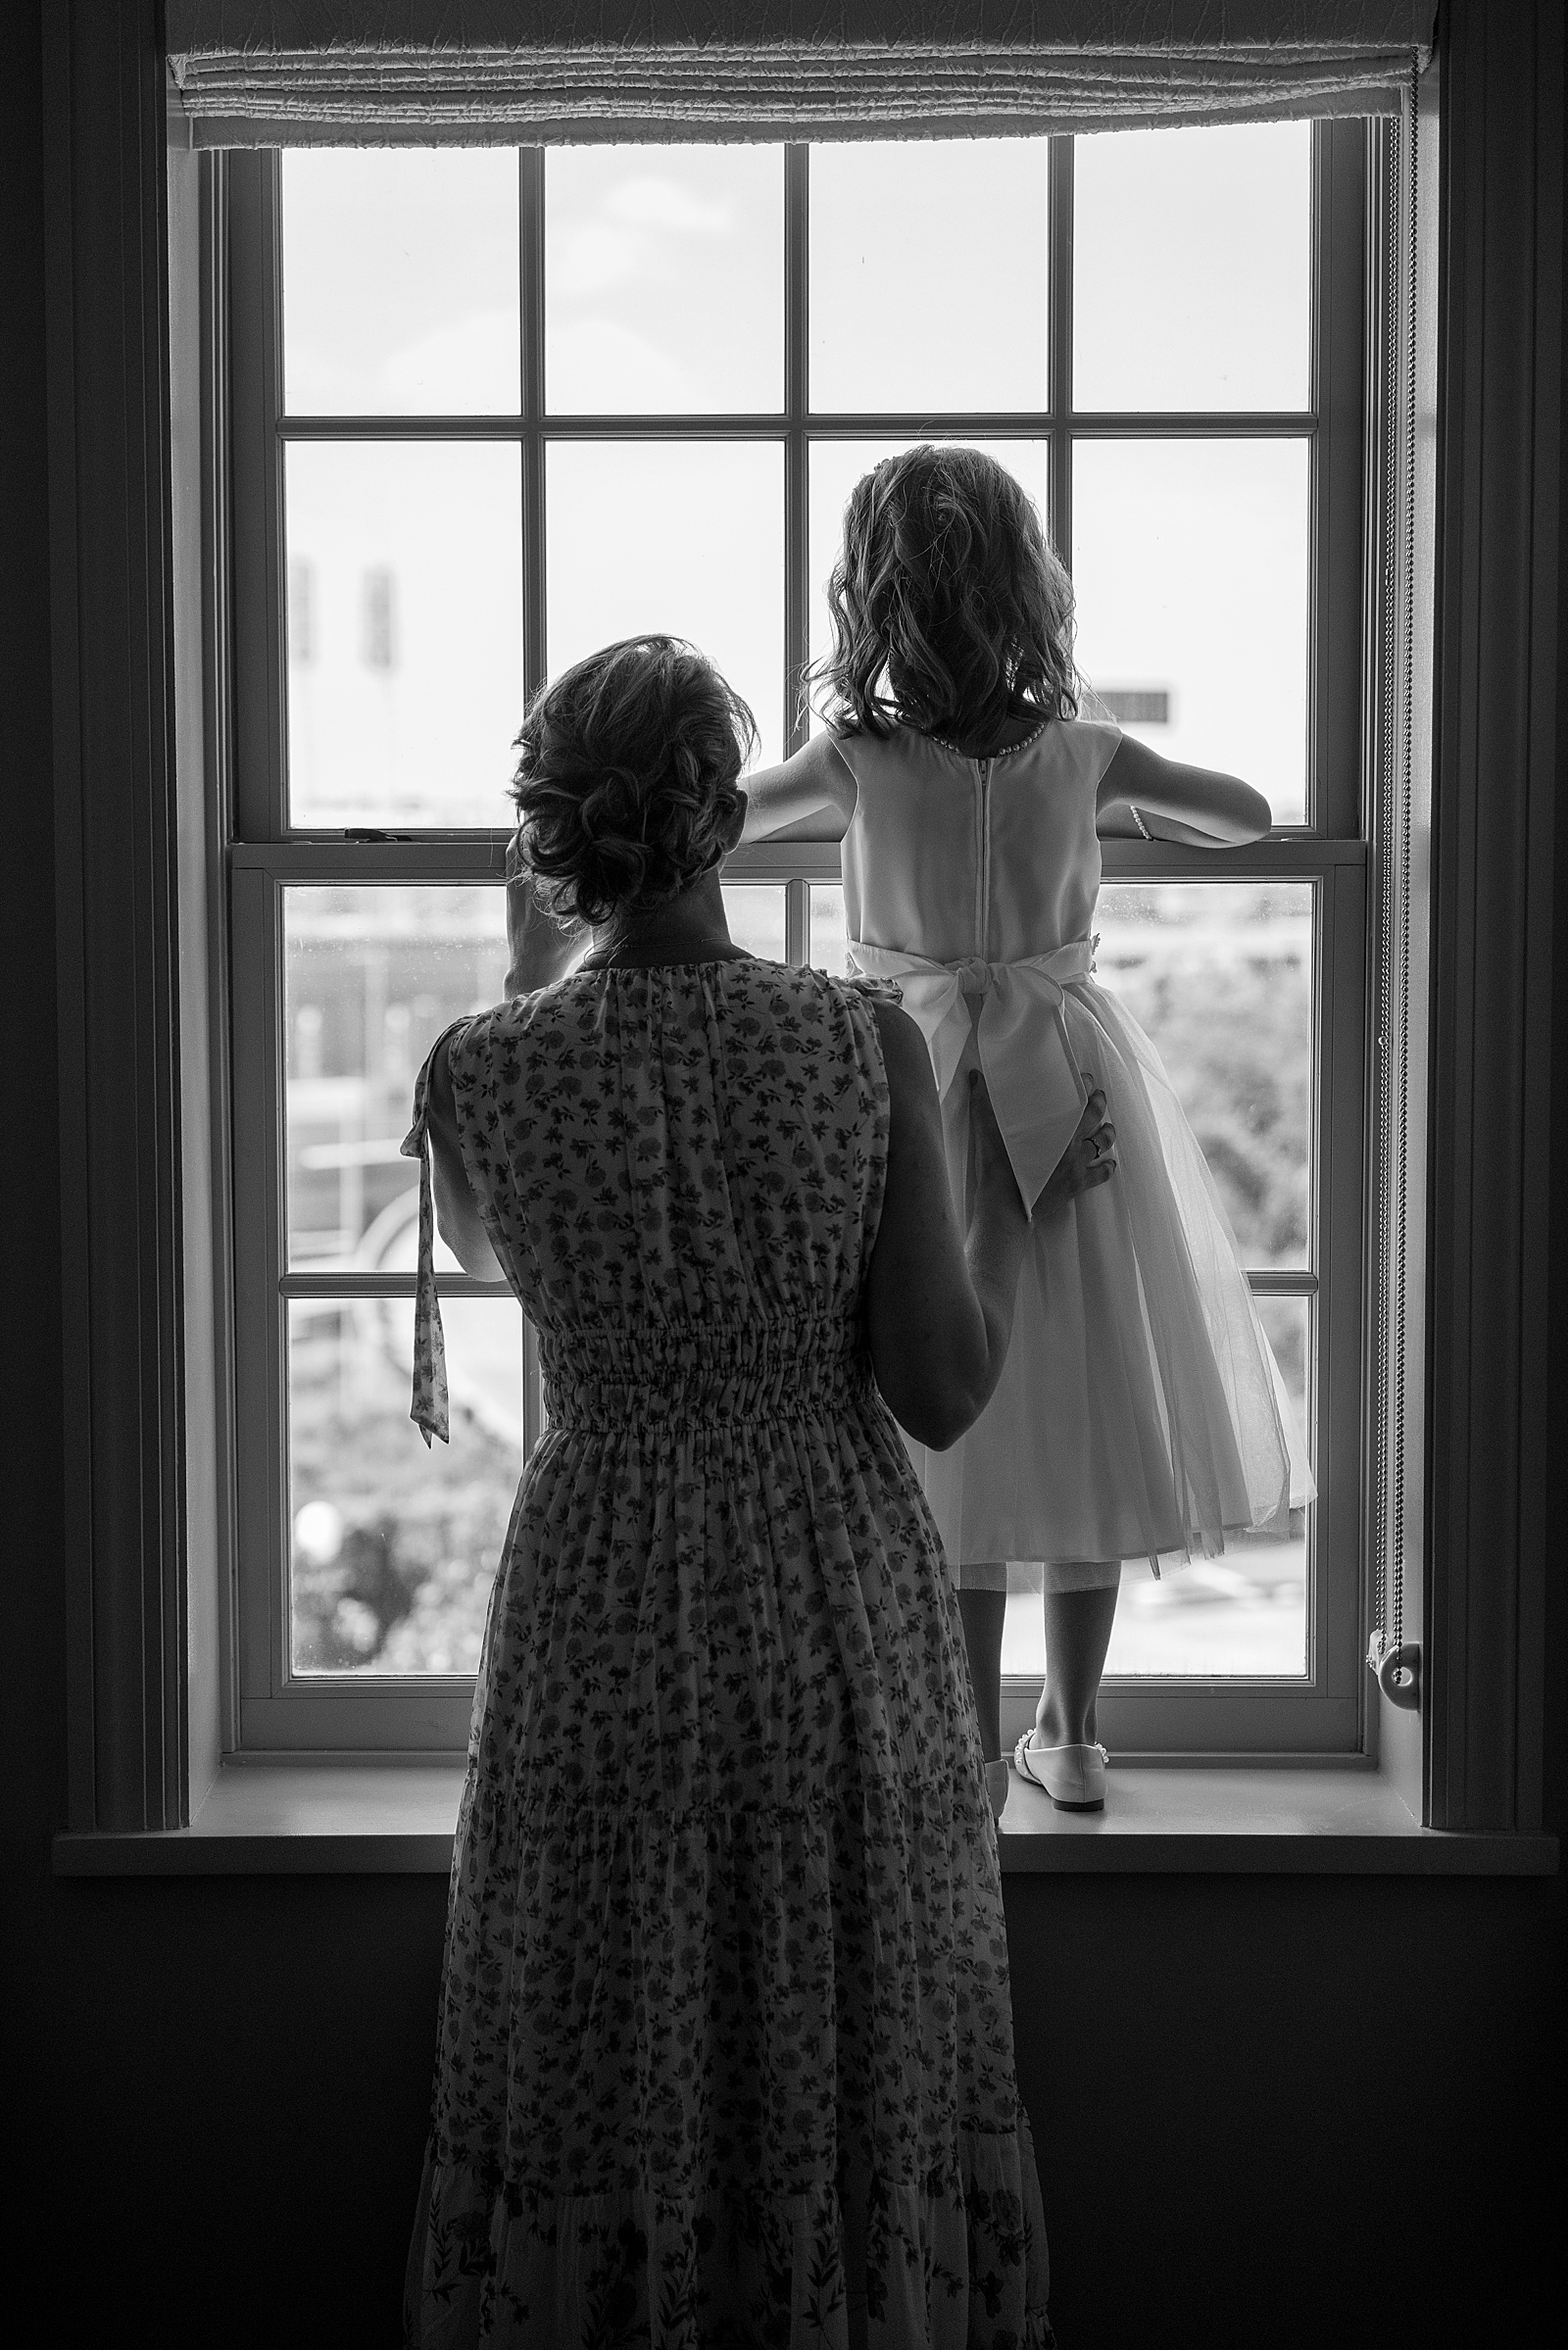 Flower girl looking out the window on a wedding day